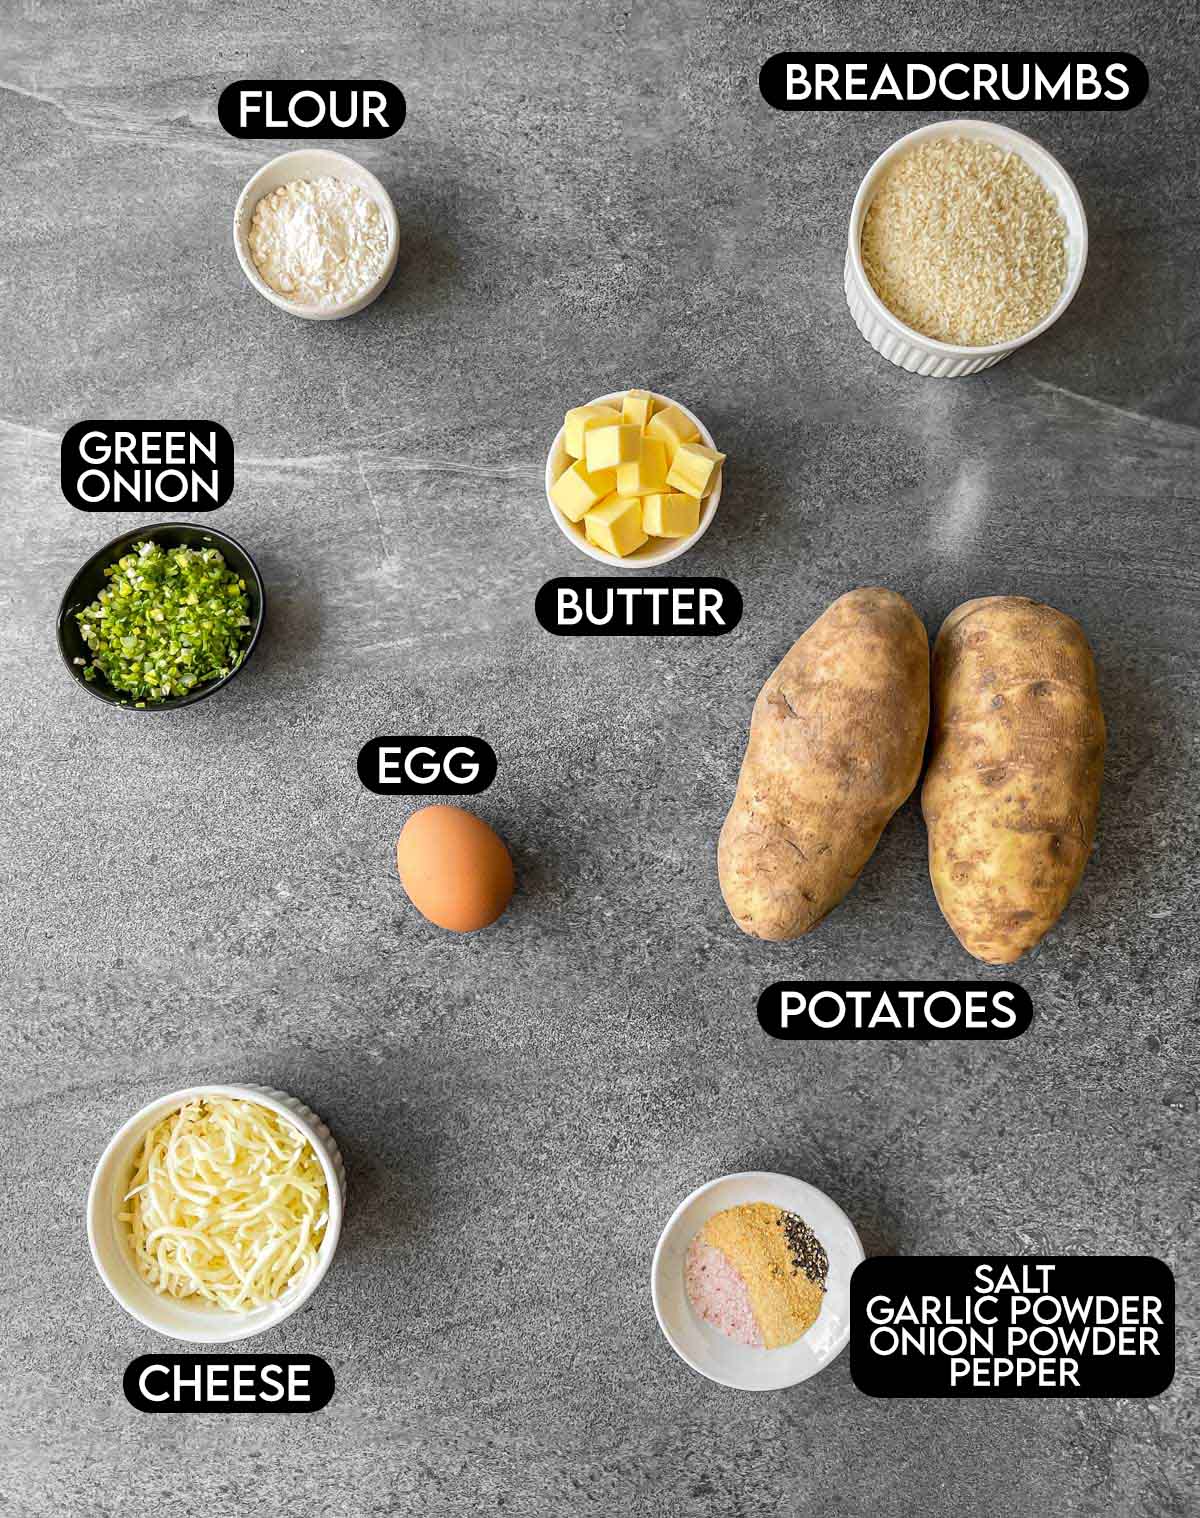 Labeled ingredients for potato croquettes: flour, breadcrumbs, green onion, butter, egg, potatoes, cheese, salt, garlic powder, onion powder, and pepper.